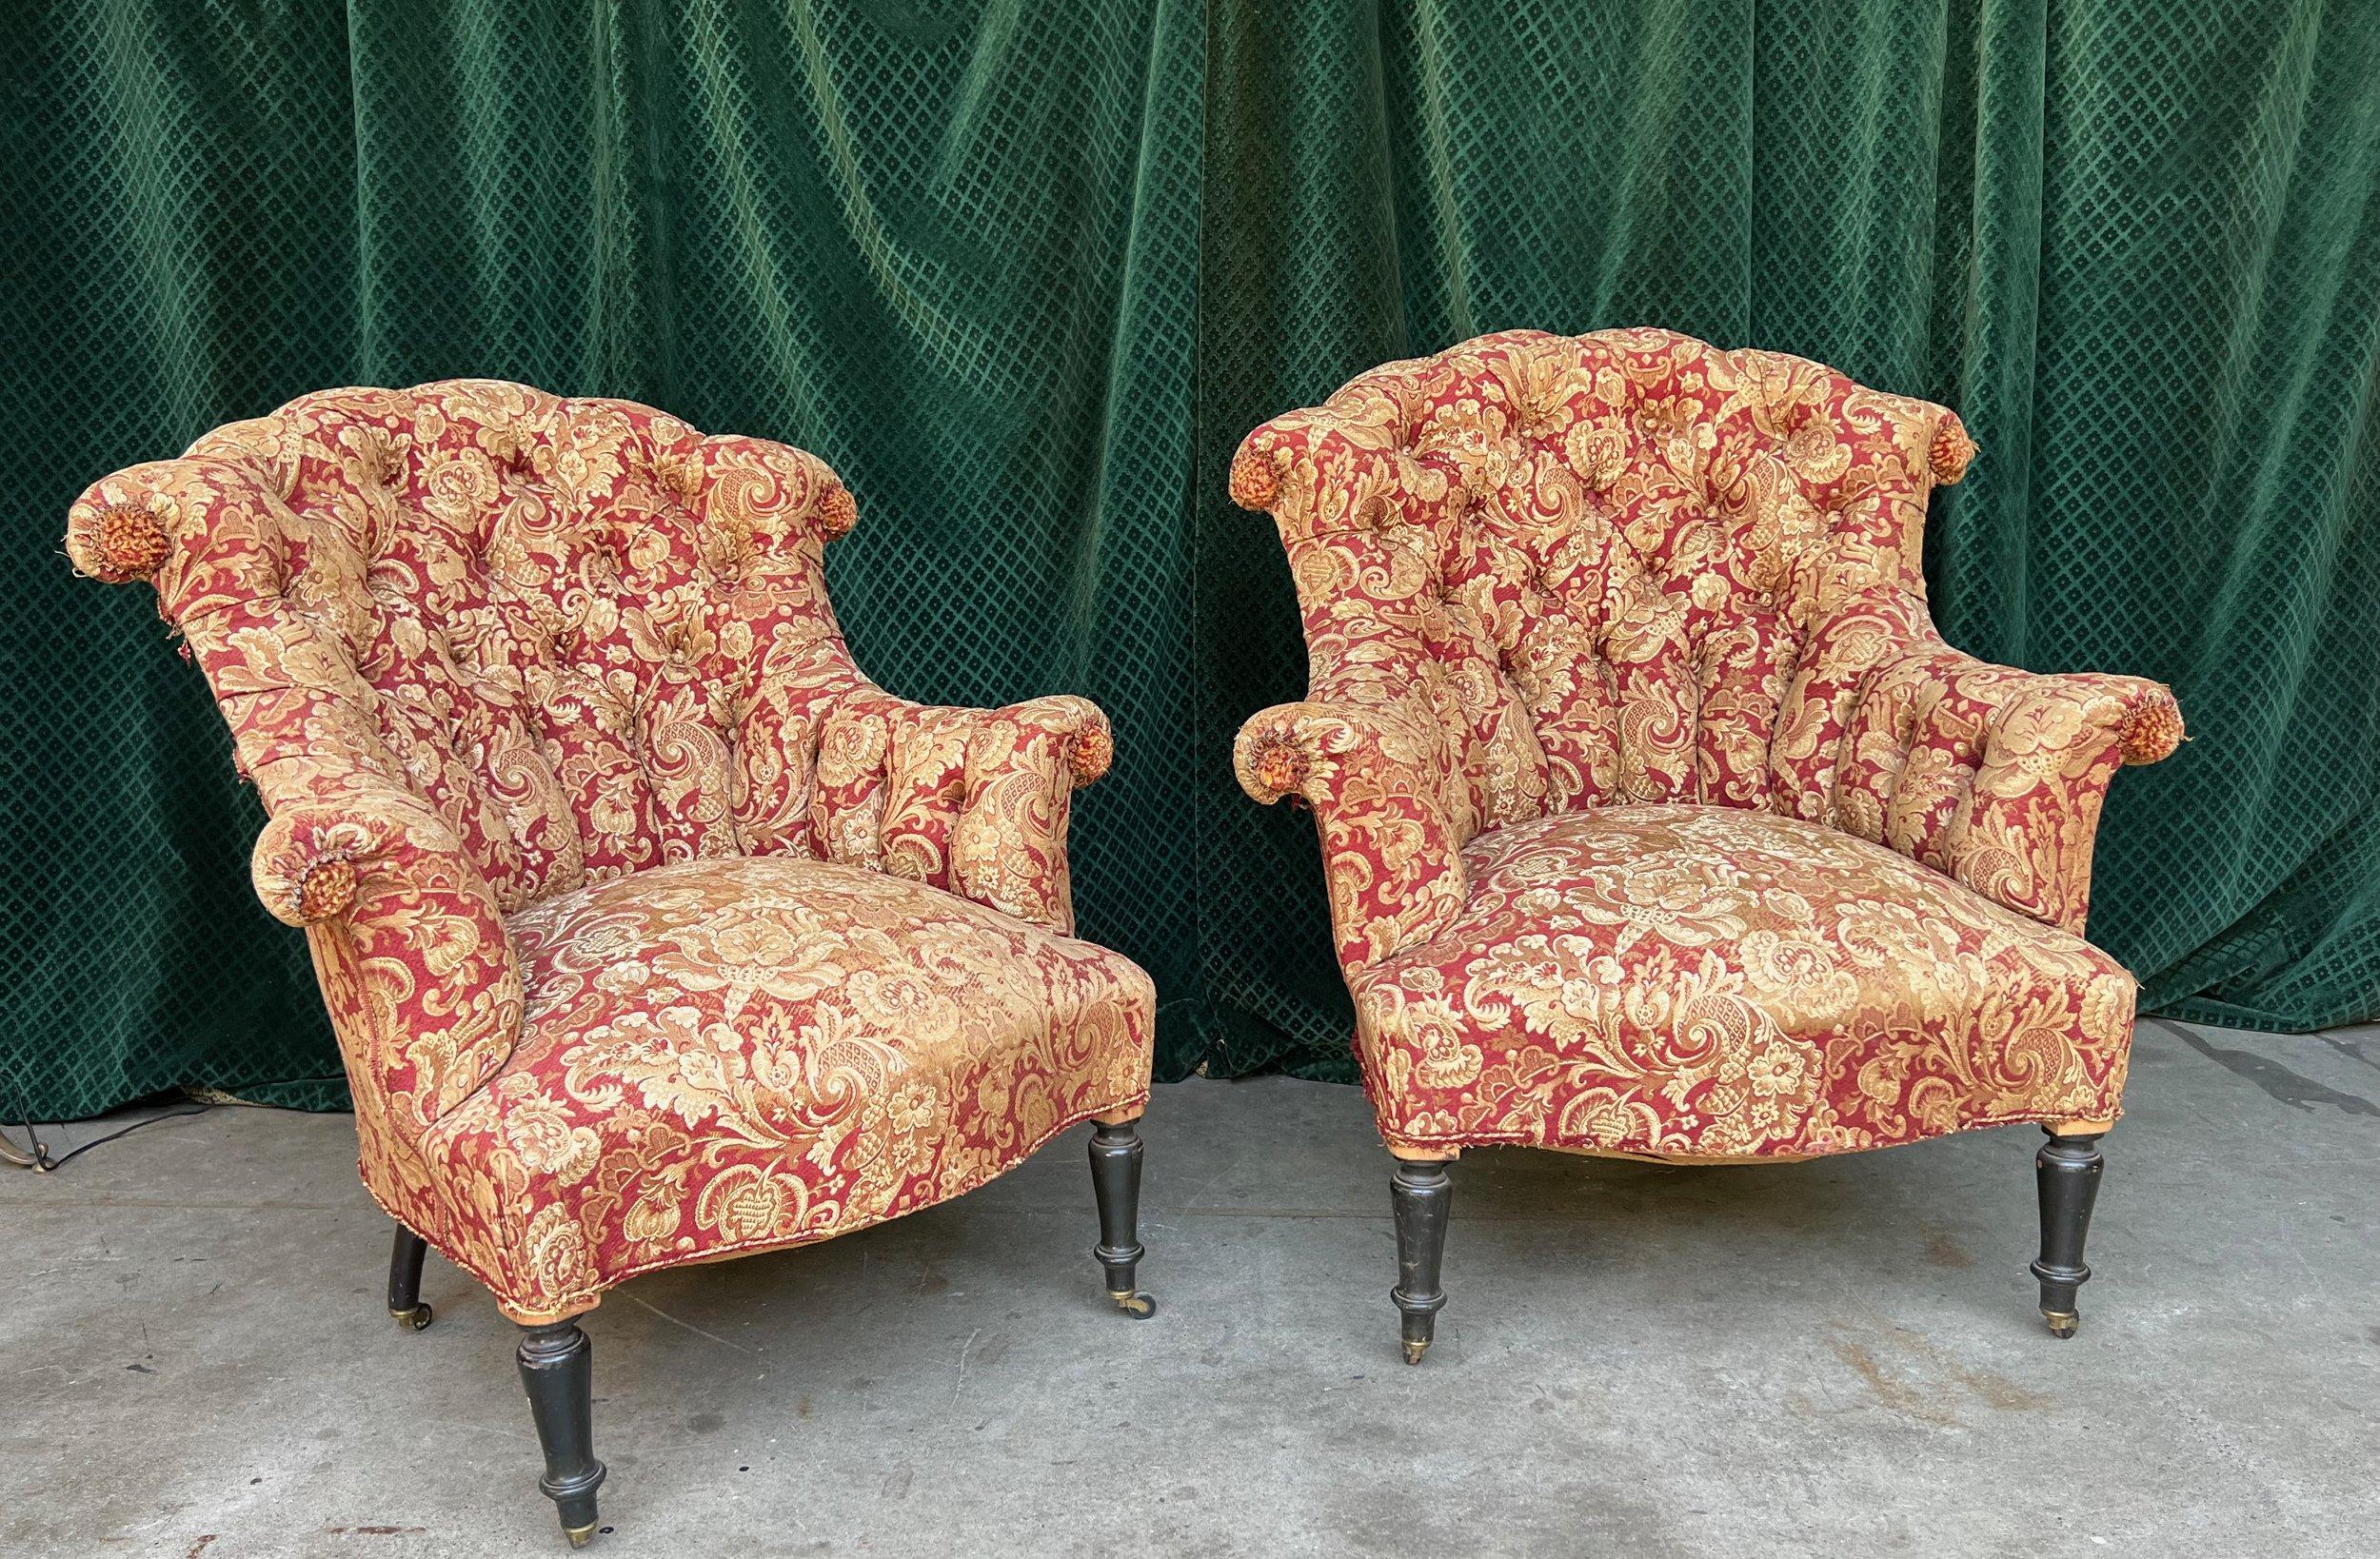 A stunning pair of 19th century French tufted and scrolled armchairs, reflecting the distinguished Napoleon III style. These sophisticated and elegant chairs have the potential to elevate any living space with their presence. With their elaborate